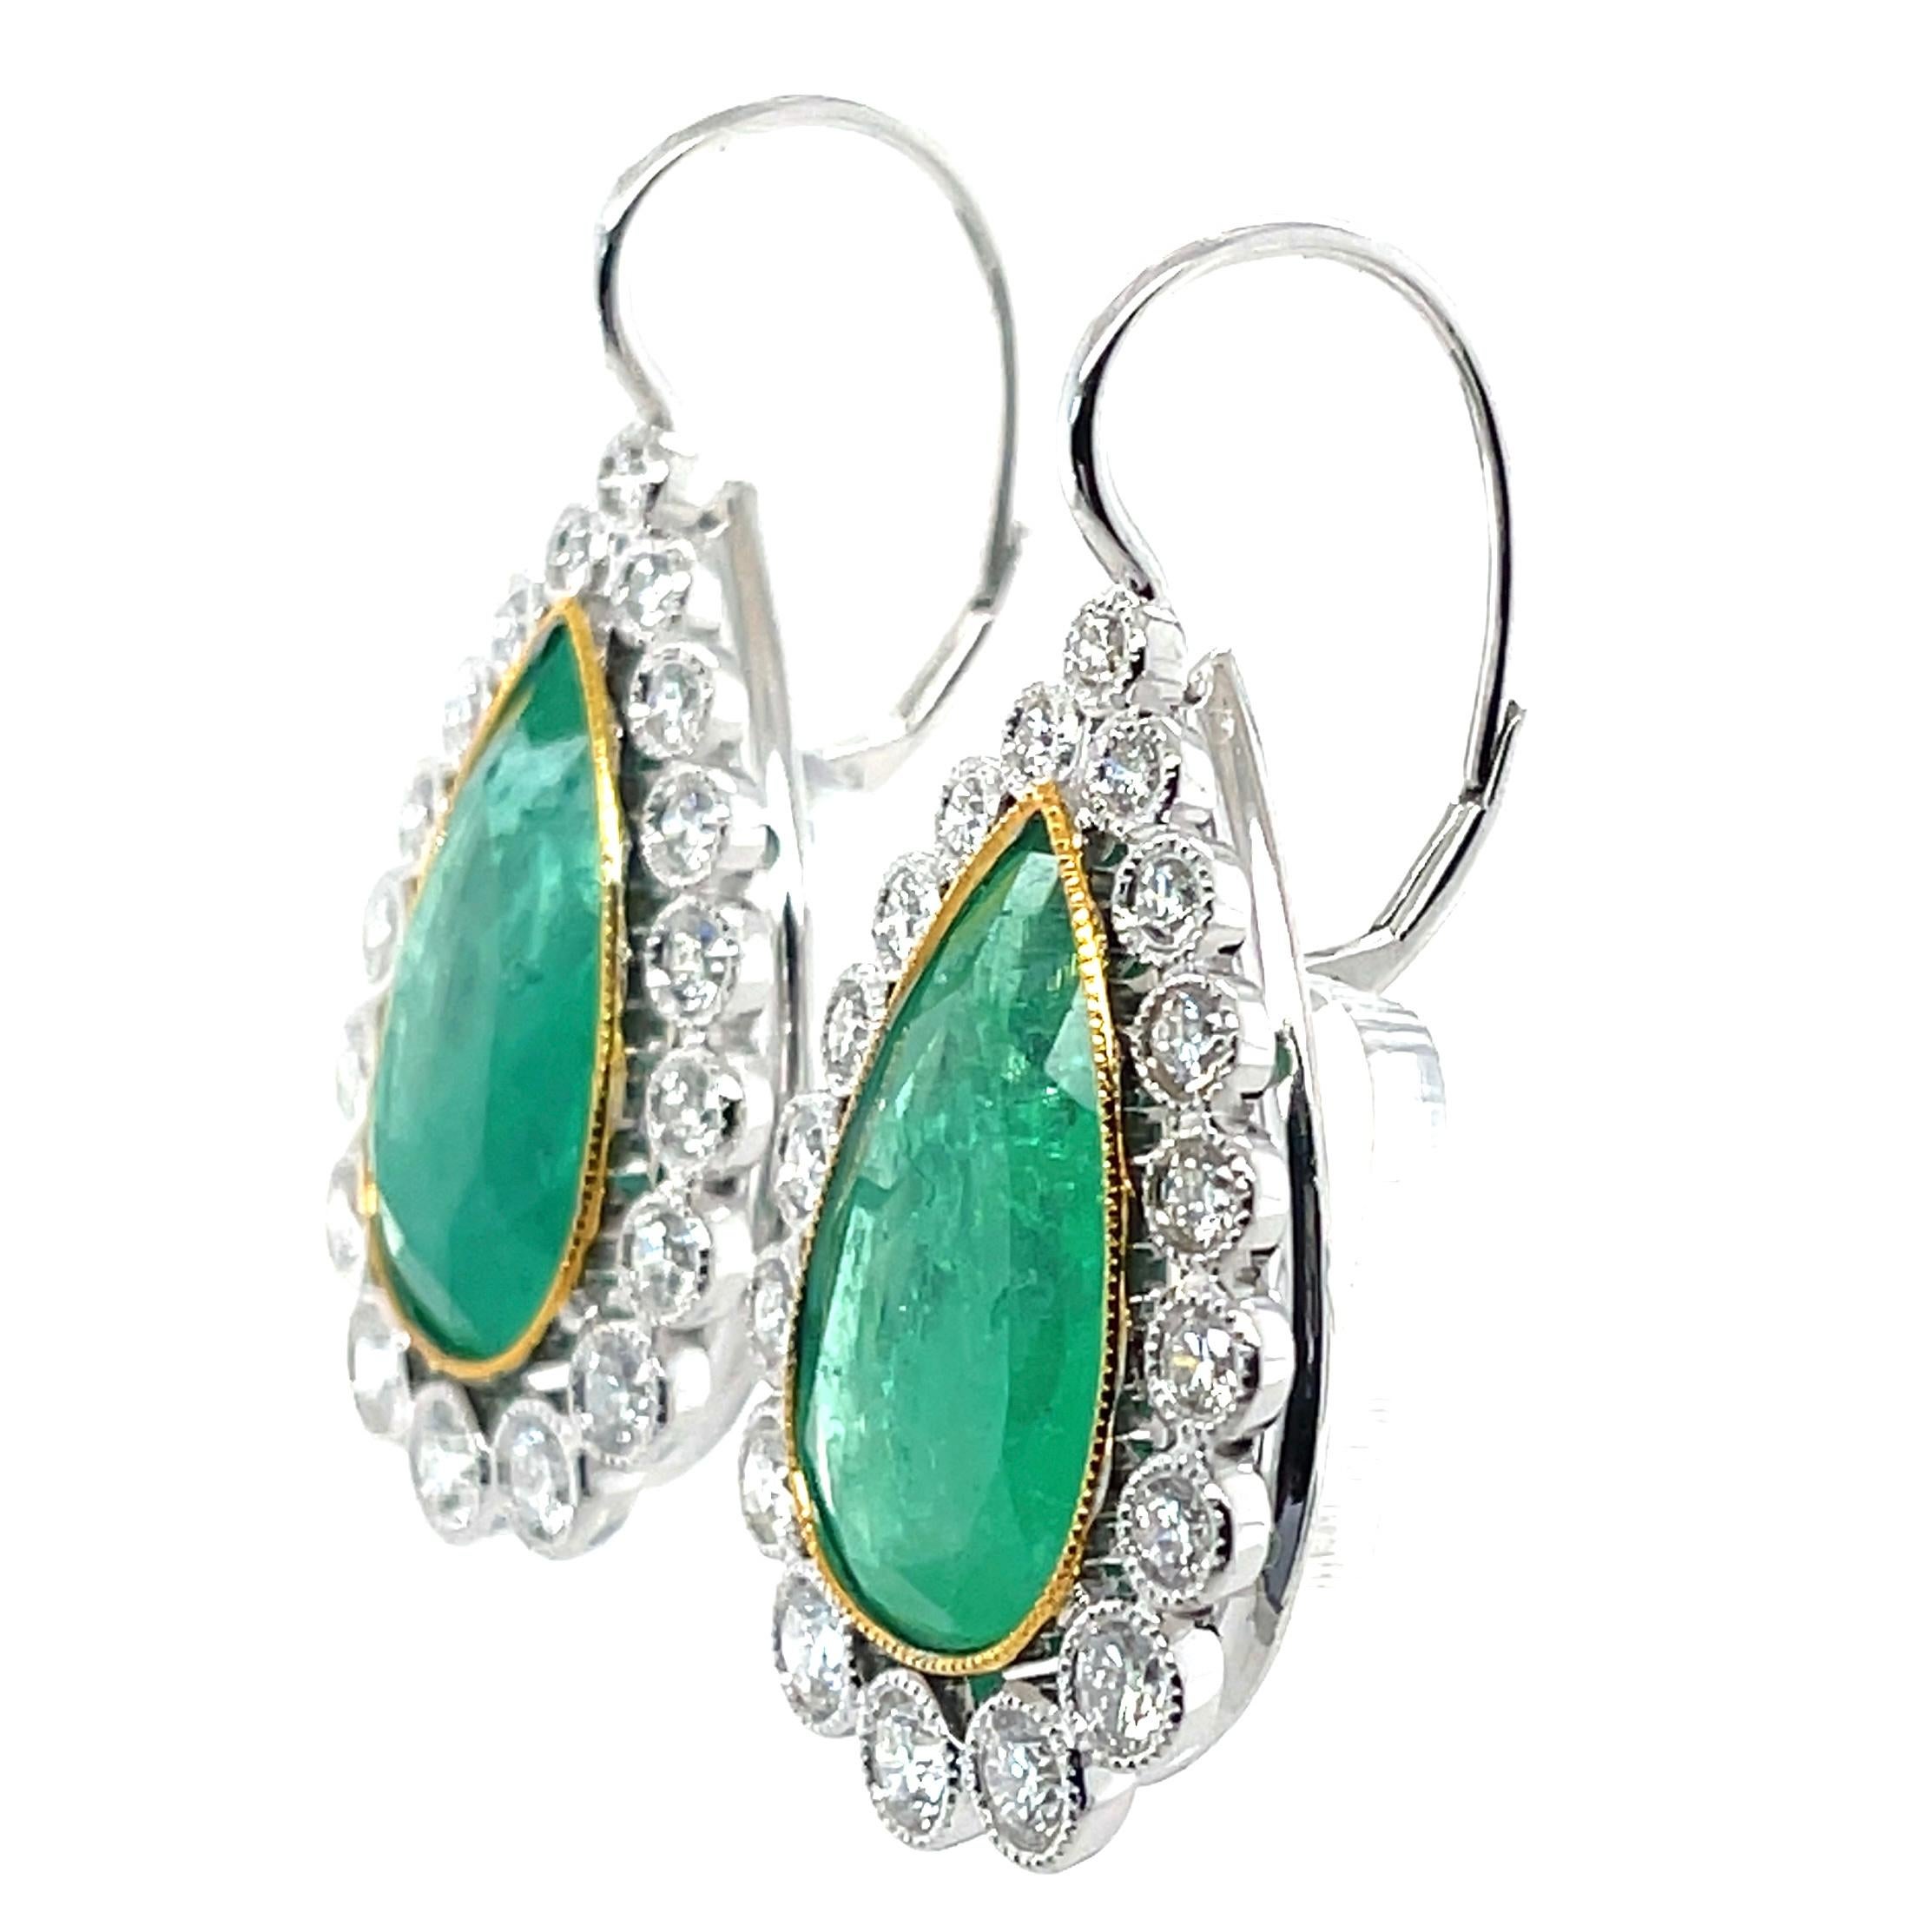 Pair of pear cut Colombian (based on my opinion) emerald, crafted with eighteen karat yellow gold, featuring a beautiful selection of thirty-six bezel set round brilliant cut diamonds, complimented by a beautiful polished finished design.

Emerald